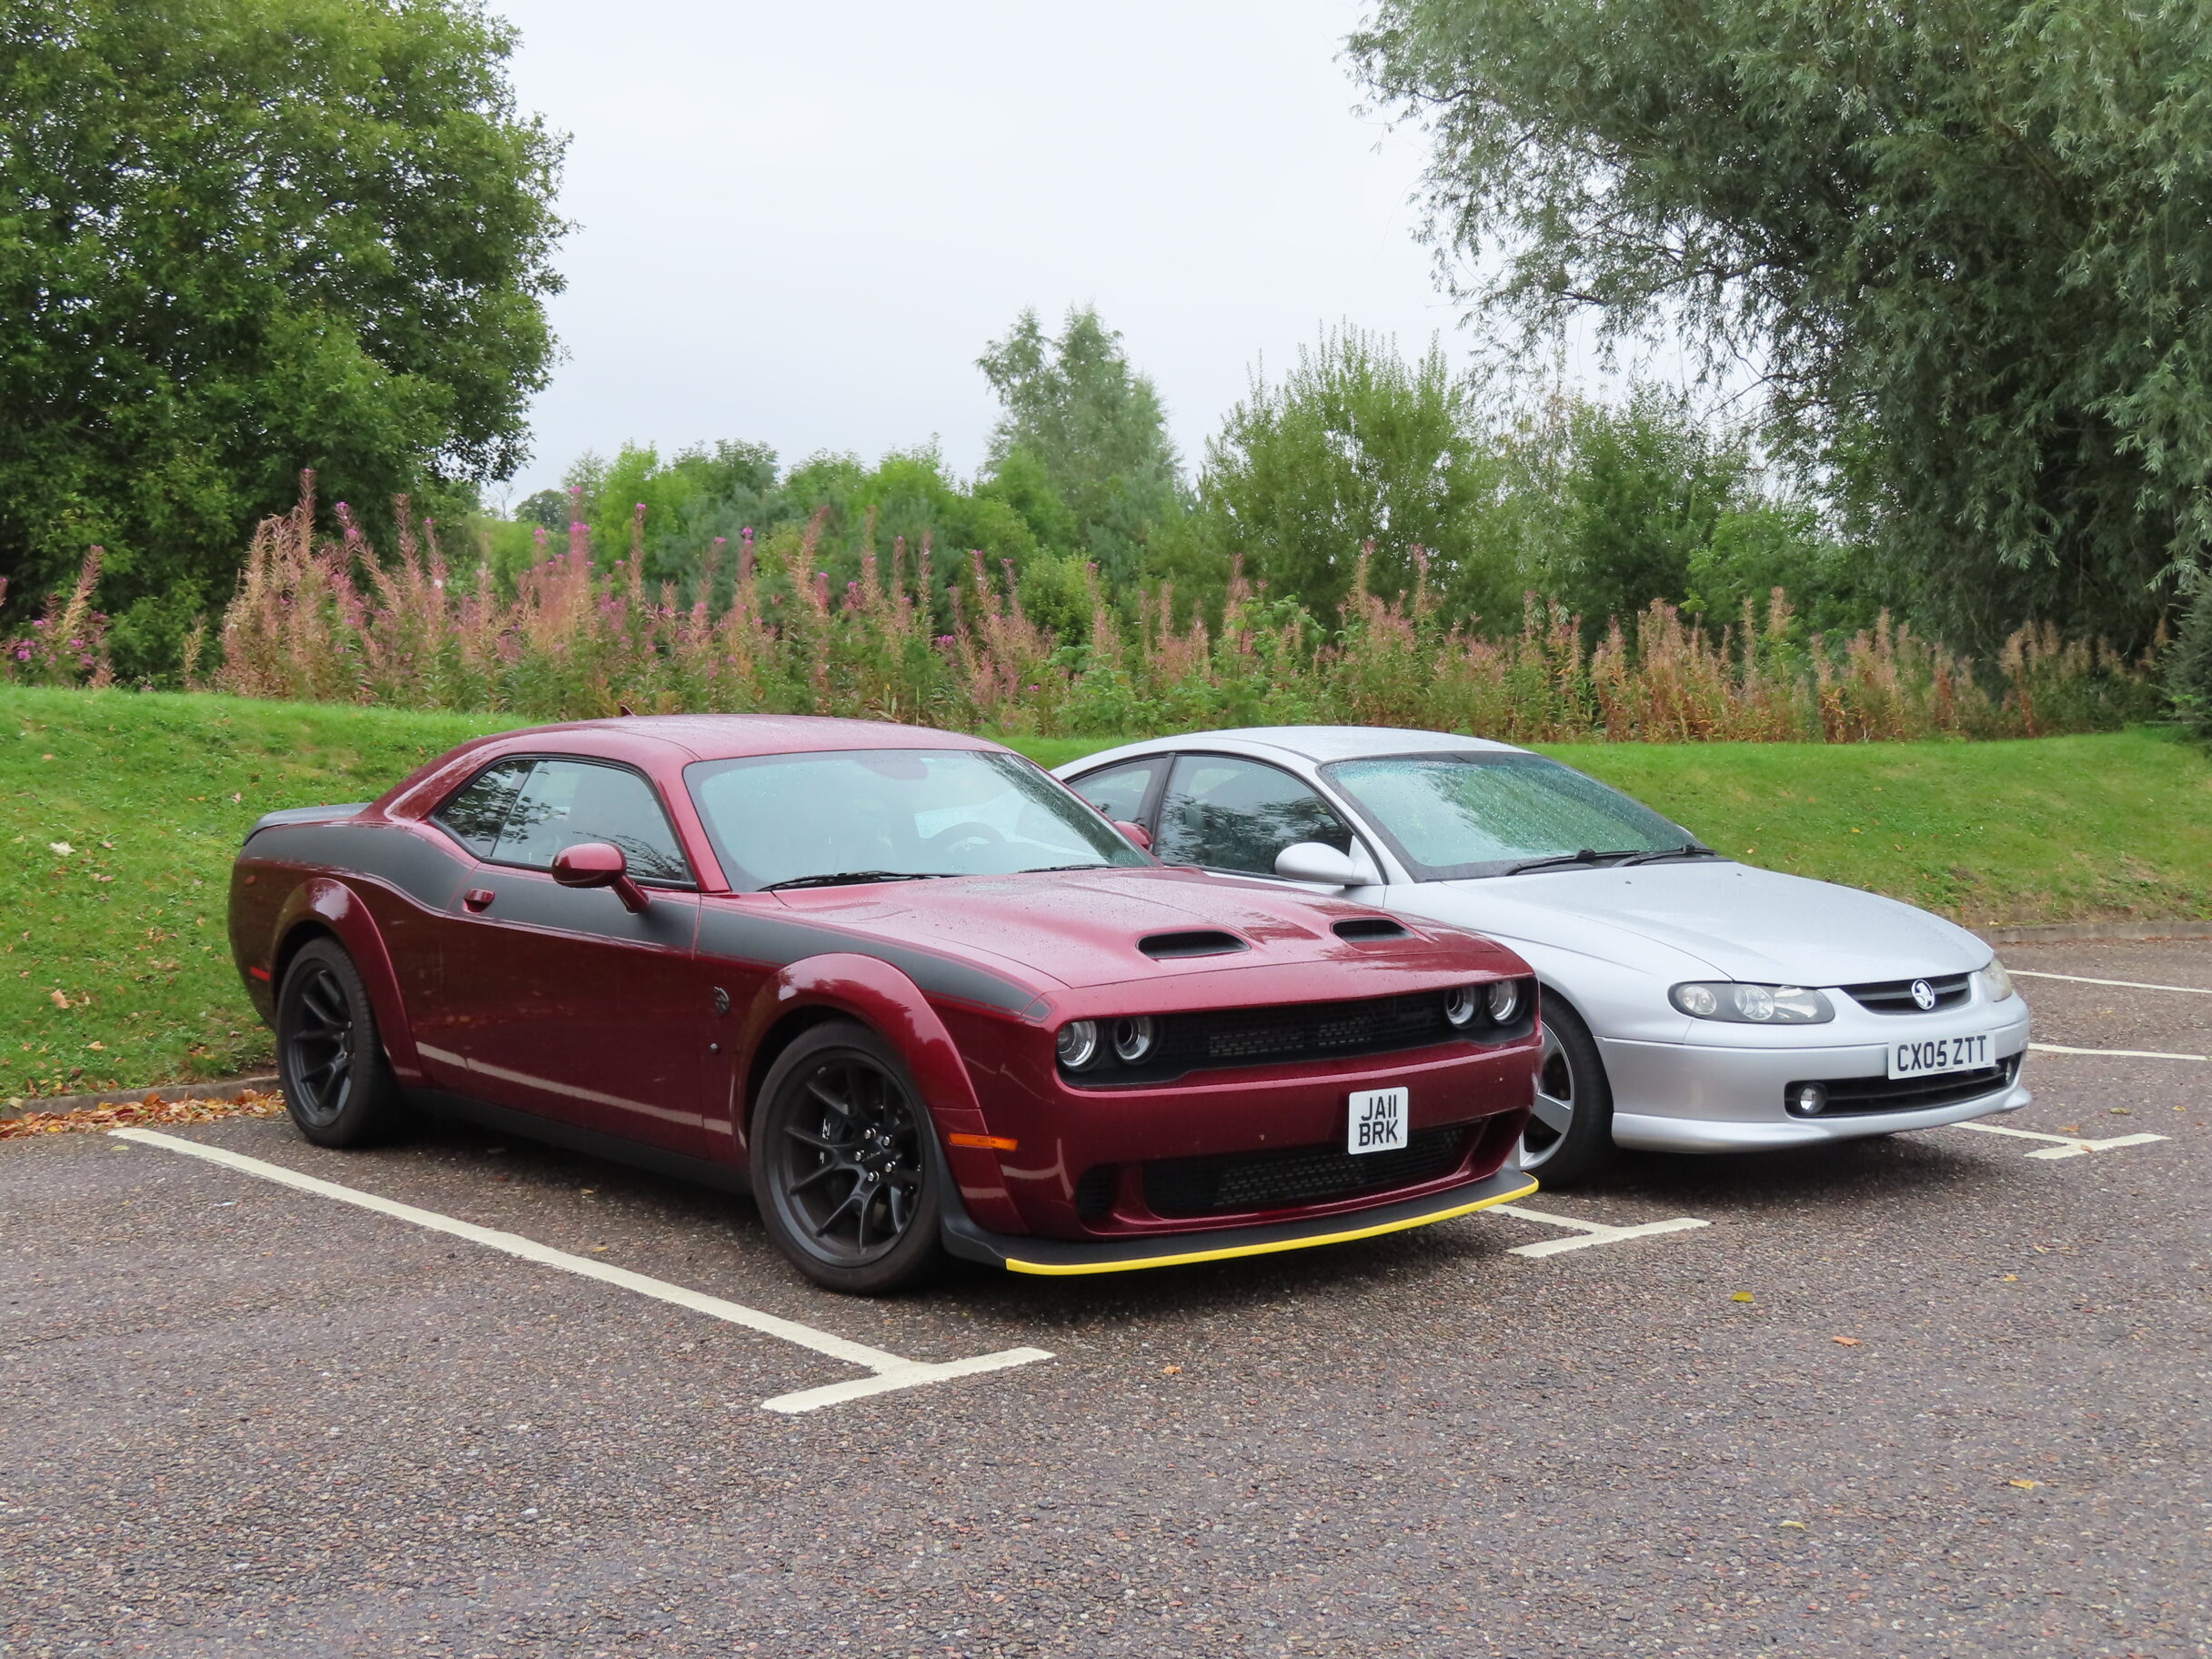 Pistonheads - The image shows two classic Mustang cars parked side by side in a parking lot. They are red and feature racing stripes, which add to their sporty appearance. Both cars have been modified with aftermarket parts and accessories, such as spoilers and rims. In the background, there is a grassy area and what appears to be a cloudy sky. The scene conveys a sense of camaraderie among car enthusiasts.